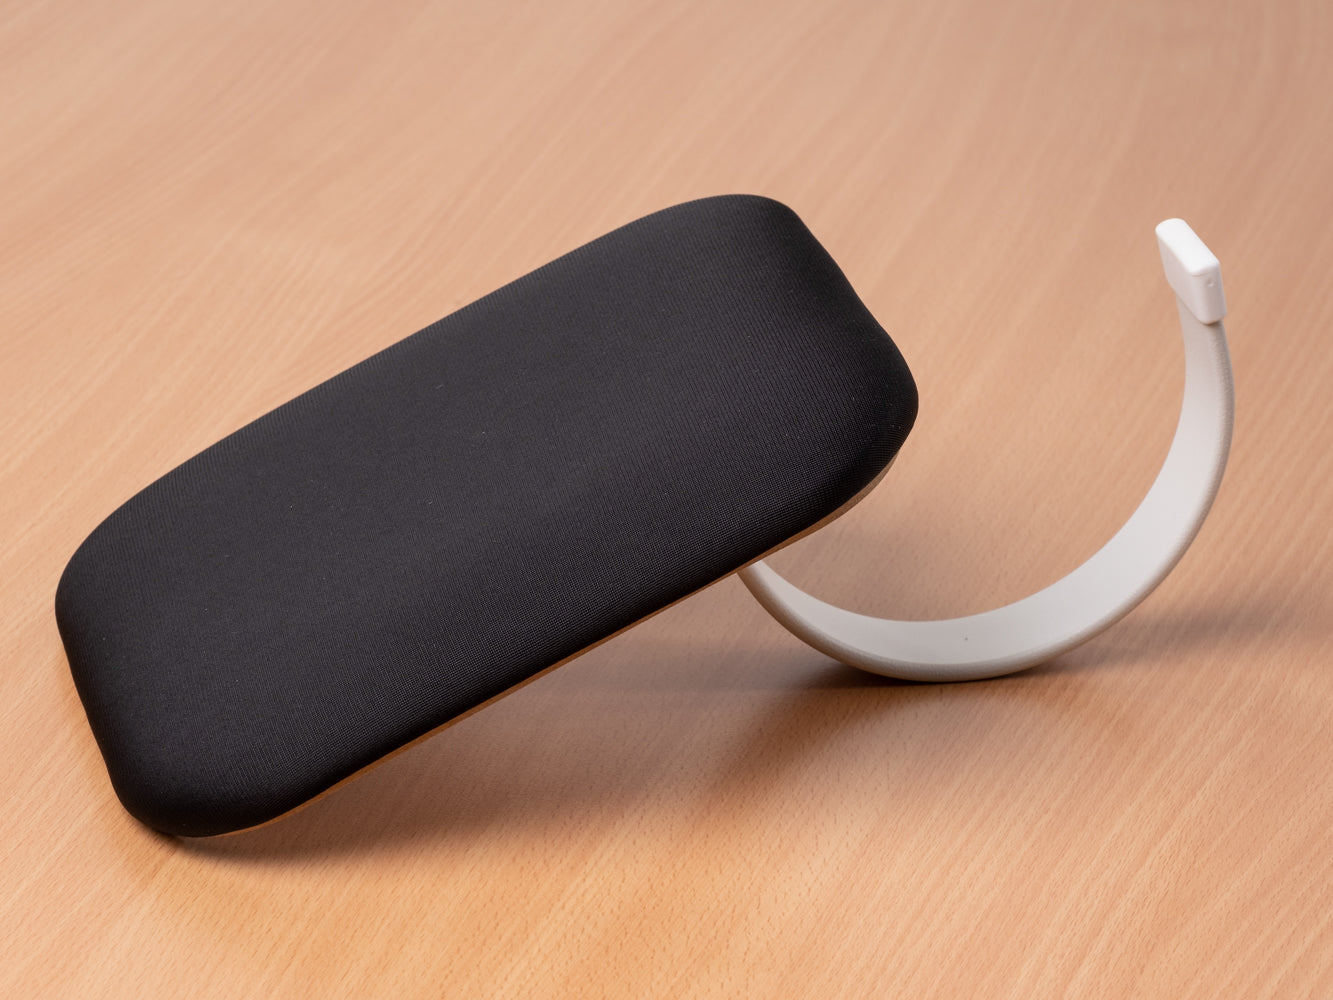 MOUSE ERGO REST - table backrest - easily attached to any table - extends the depth